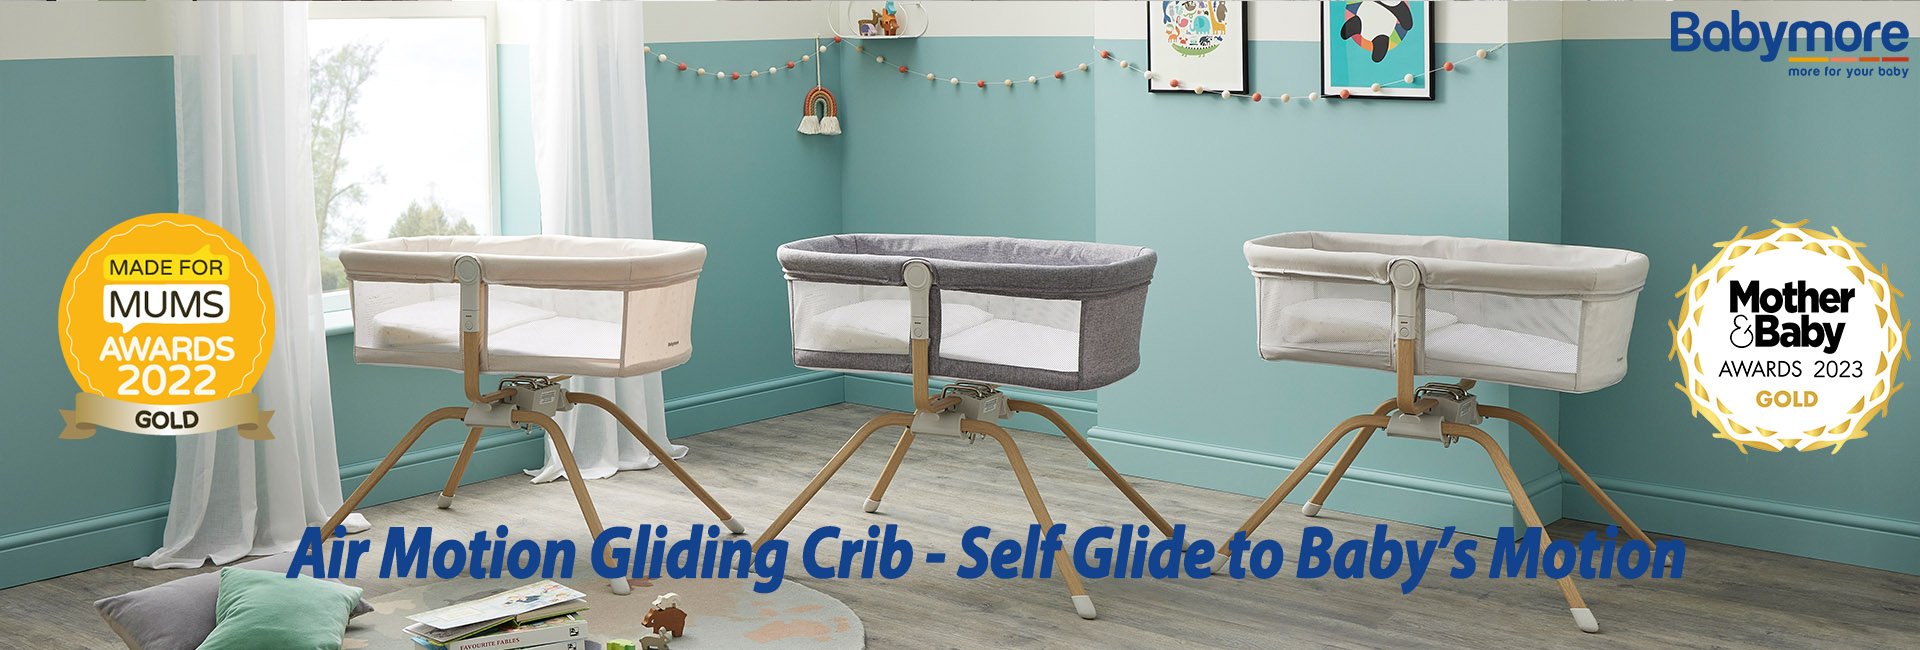 Air Motion Gliding Crib - Self Glide to Baby's motion